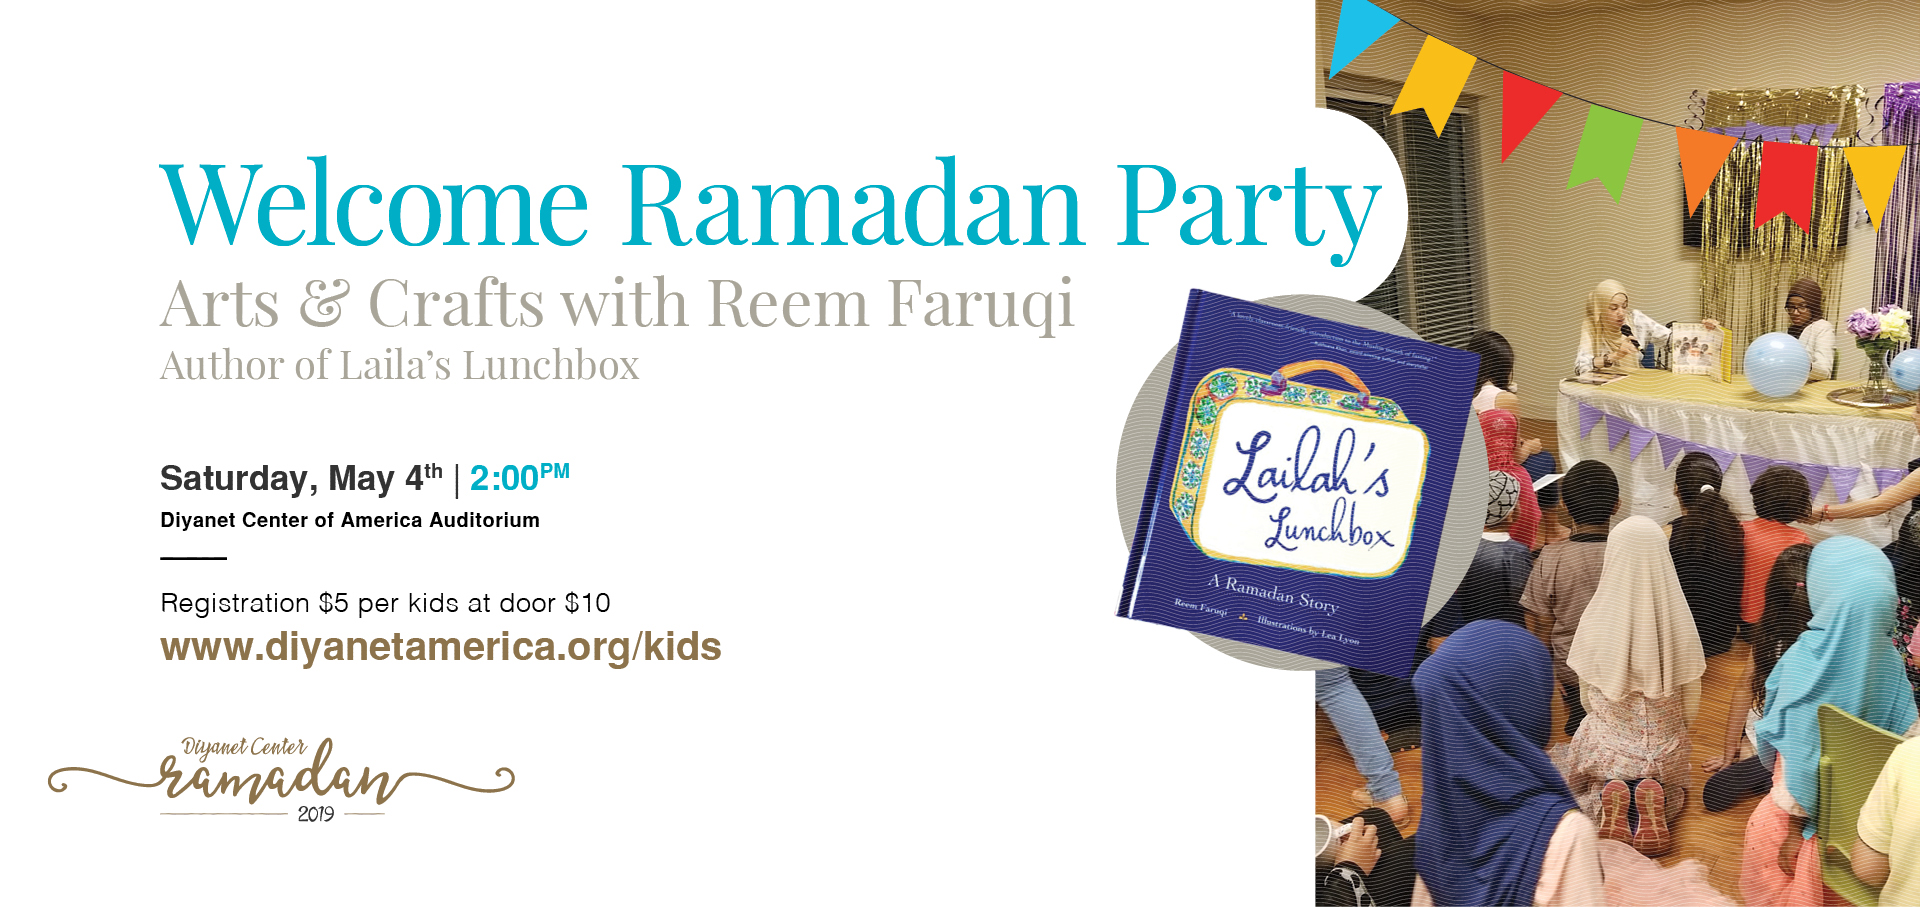 Welcome Ramadan Party - DCA Ramadan 2019 - SOLD OUT